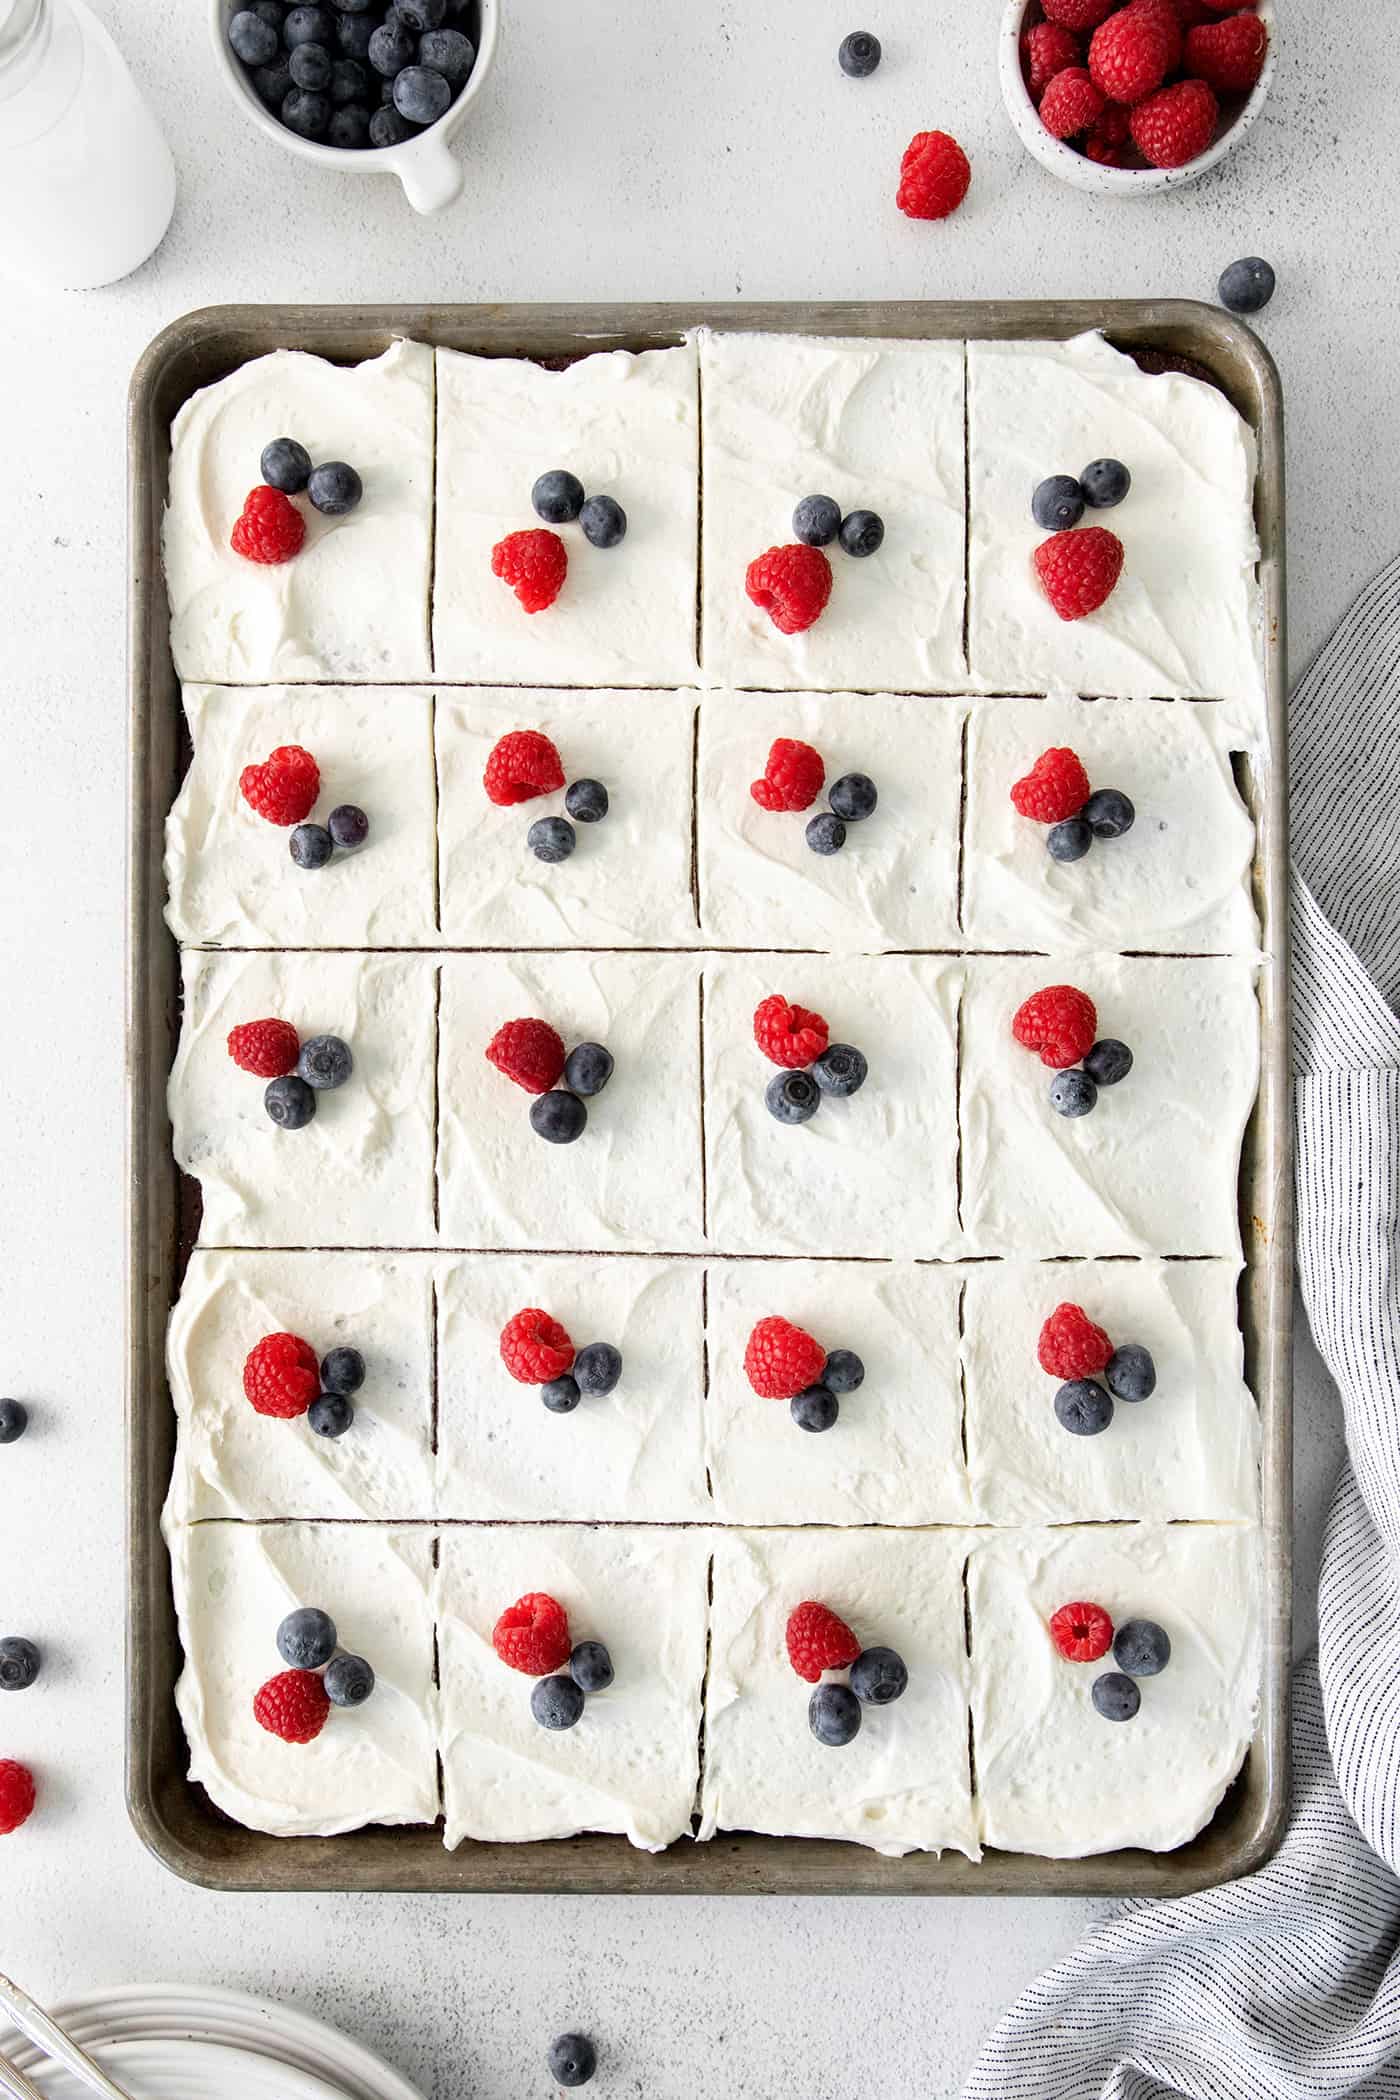 Berries on top of a sliced sheet cake